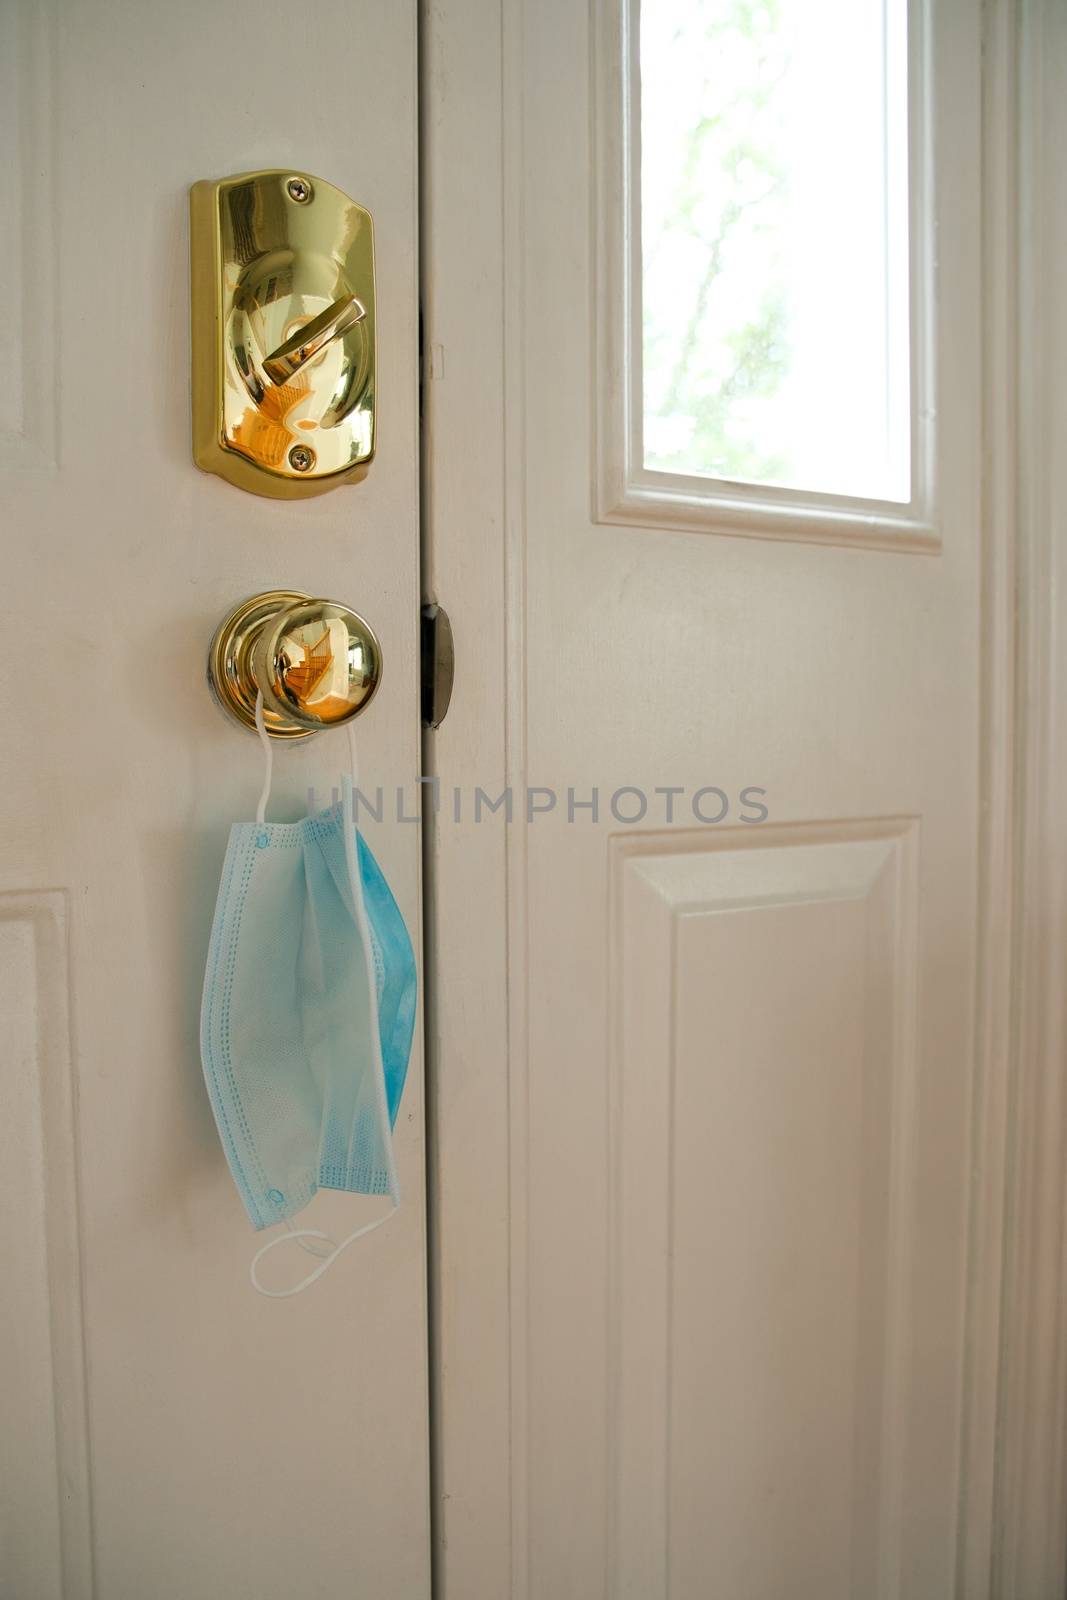 Face mask hanging from door handle on white door with sunlight coming in through window. Covid-19 coronavirus concept image with room for text or copy